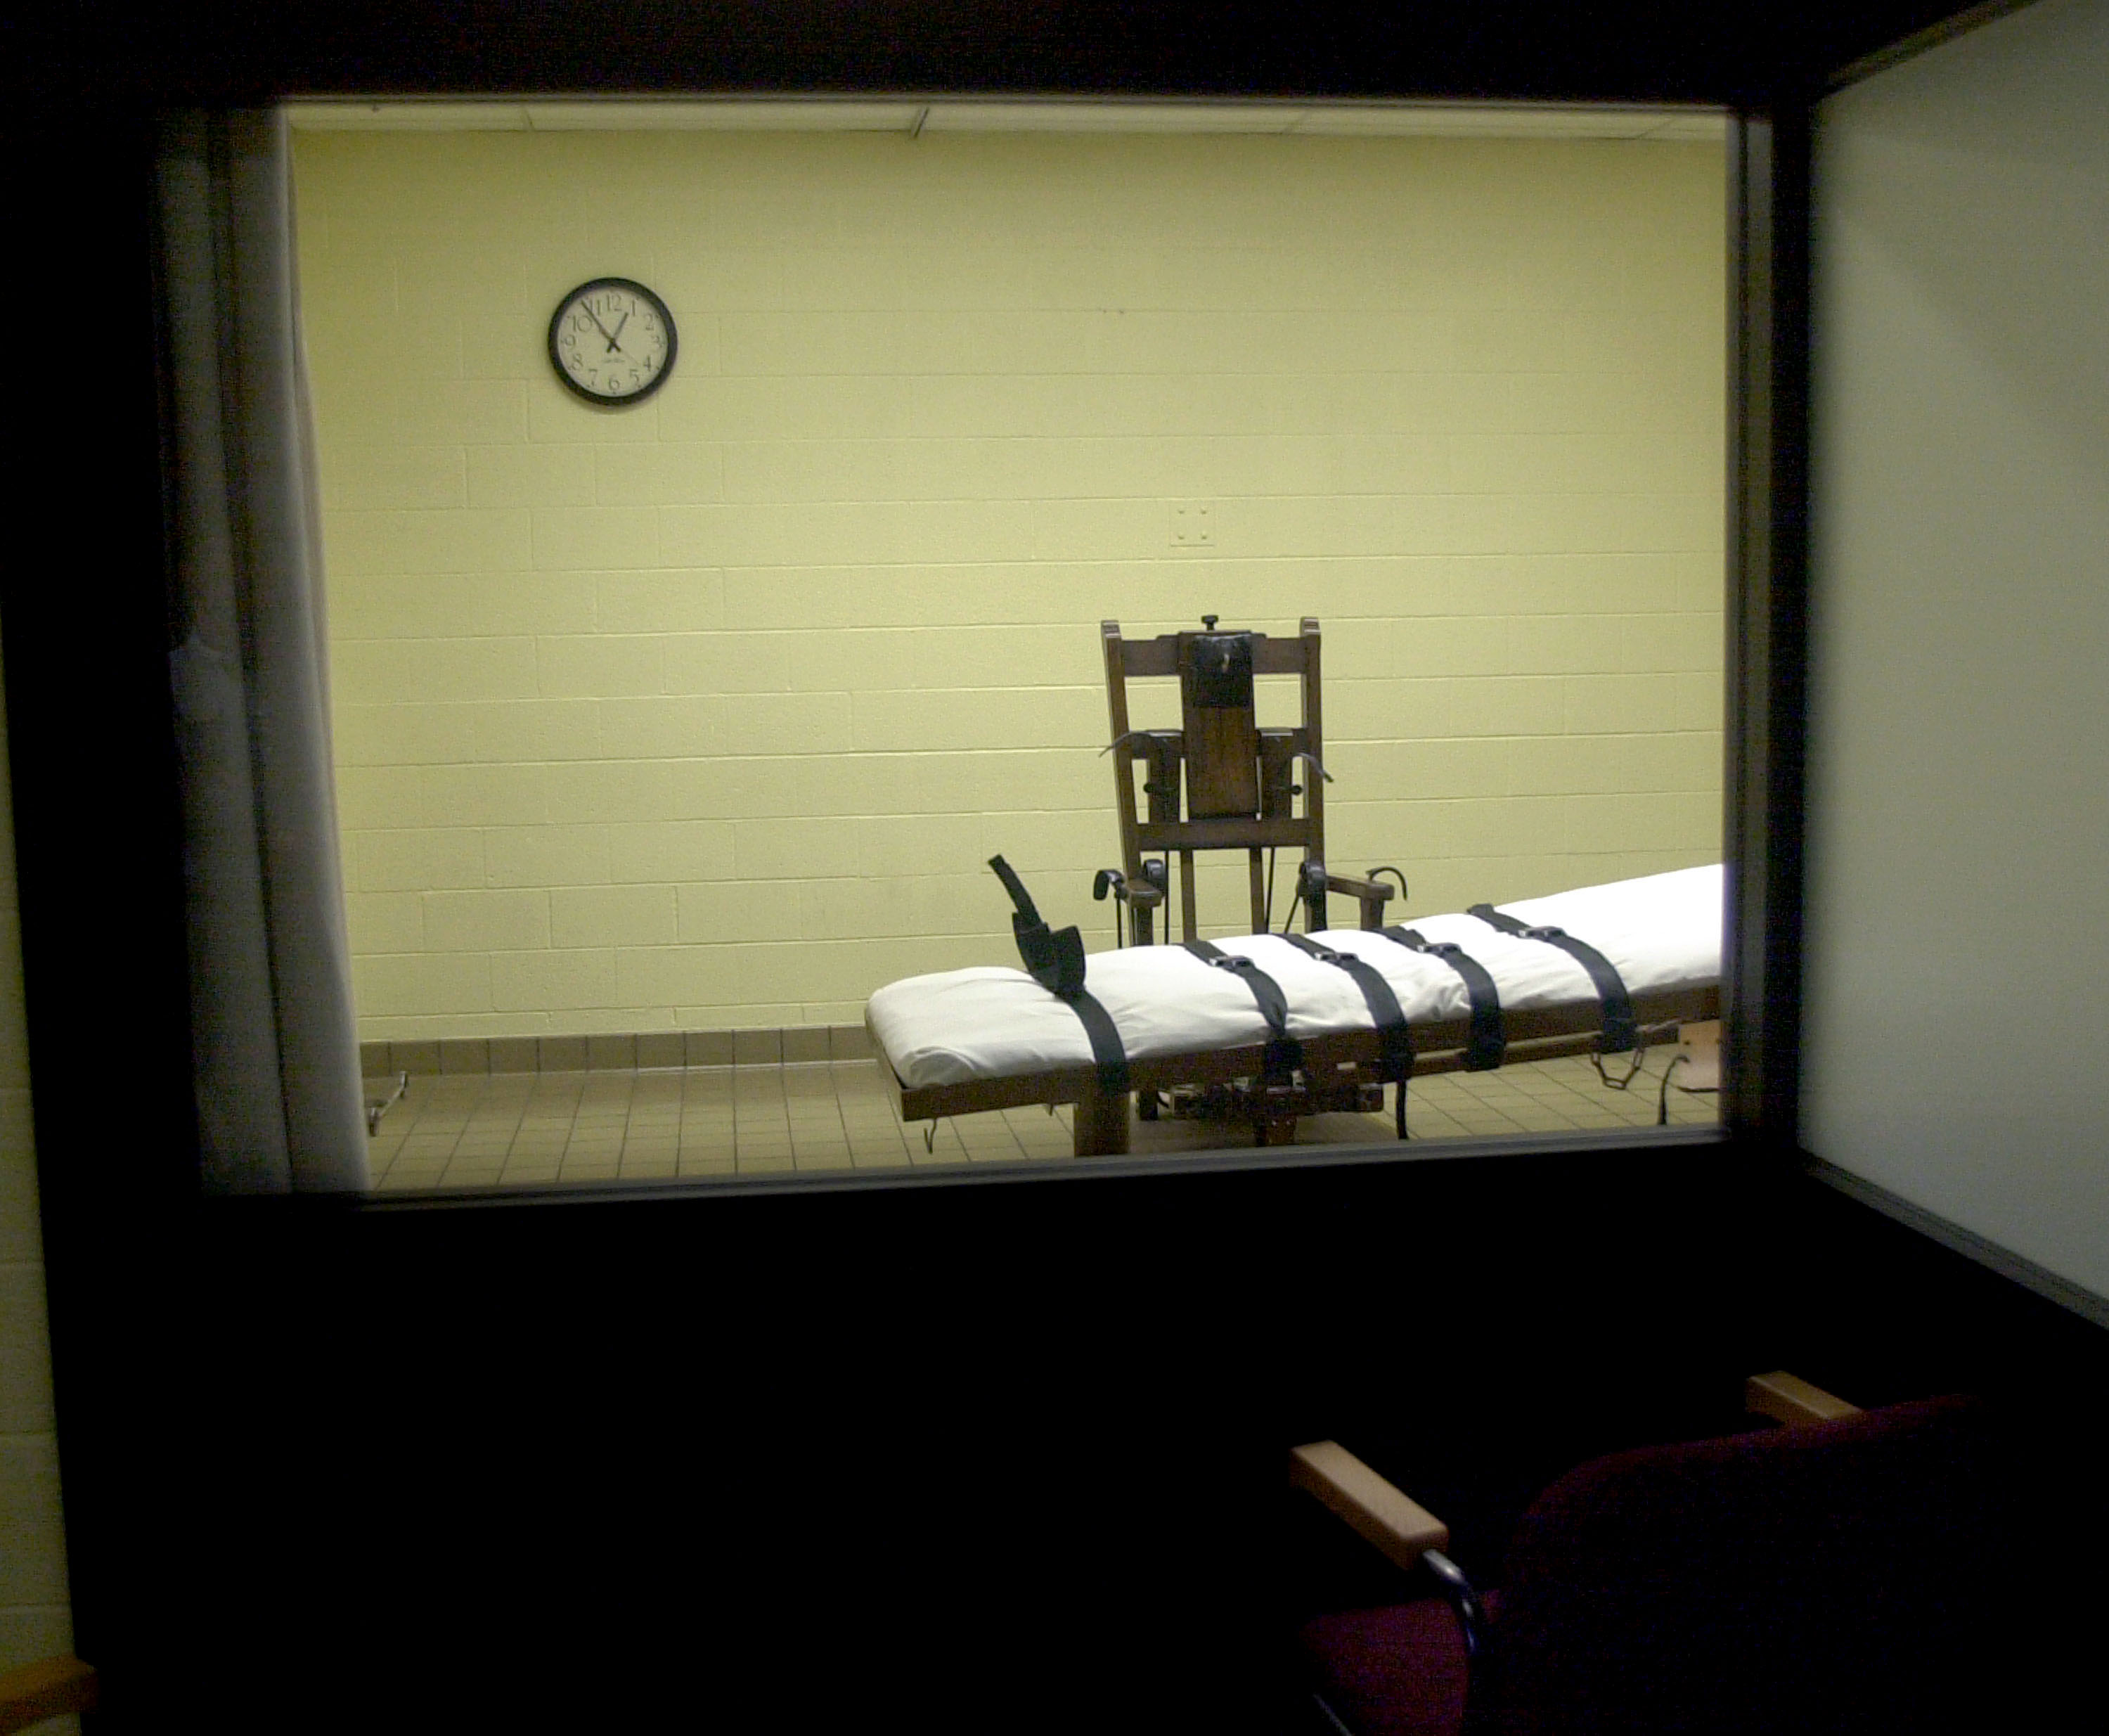 A view of the death chamber from the witness room at the Southern Ohio Correctional Facility shows an electric chair and gurney August 29, 2001 in Lucasville, Ohio. (Mike Simons&mdash;Getty Images)